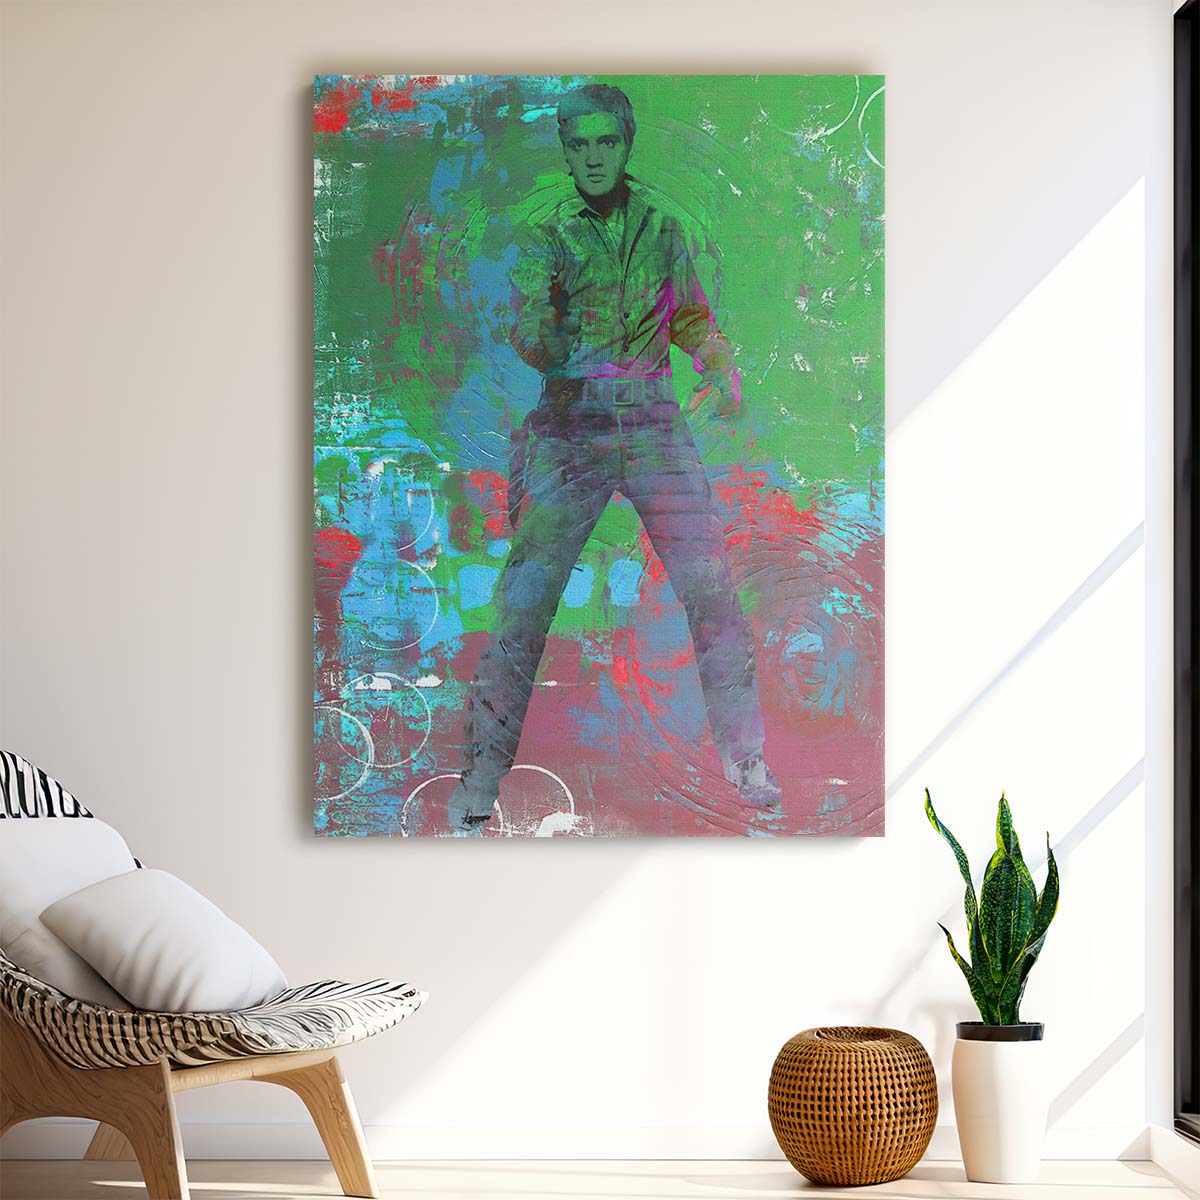 Elvis Presley Circles Green Graffiti Wall Art by Luxuriance Designs. Made in USA.